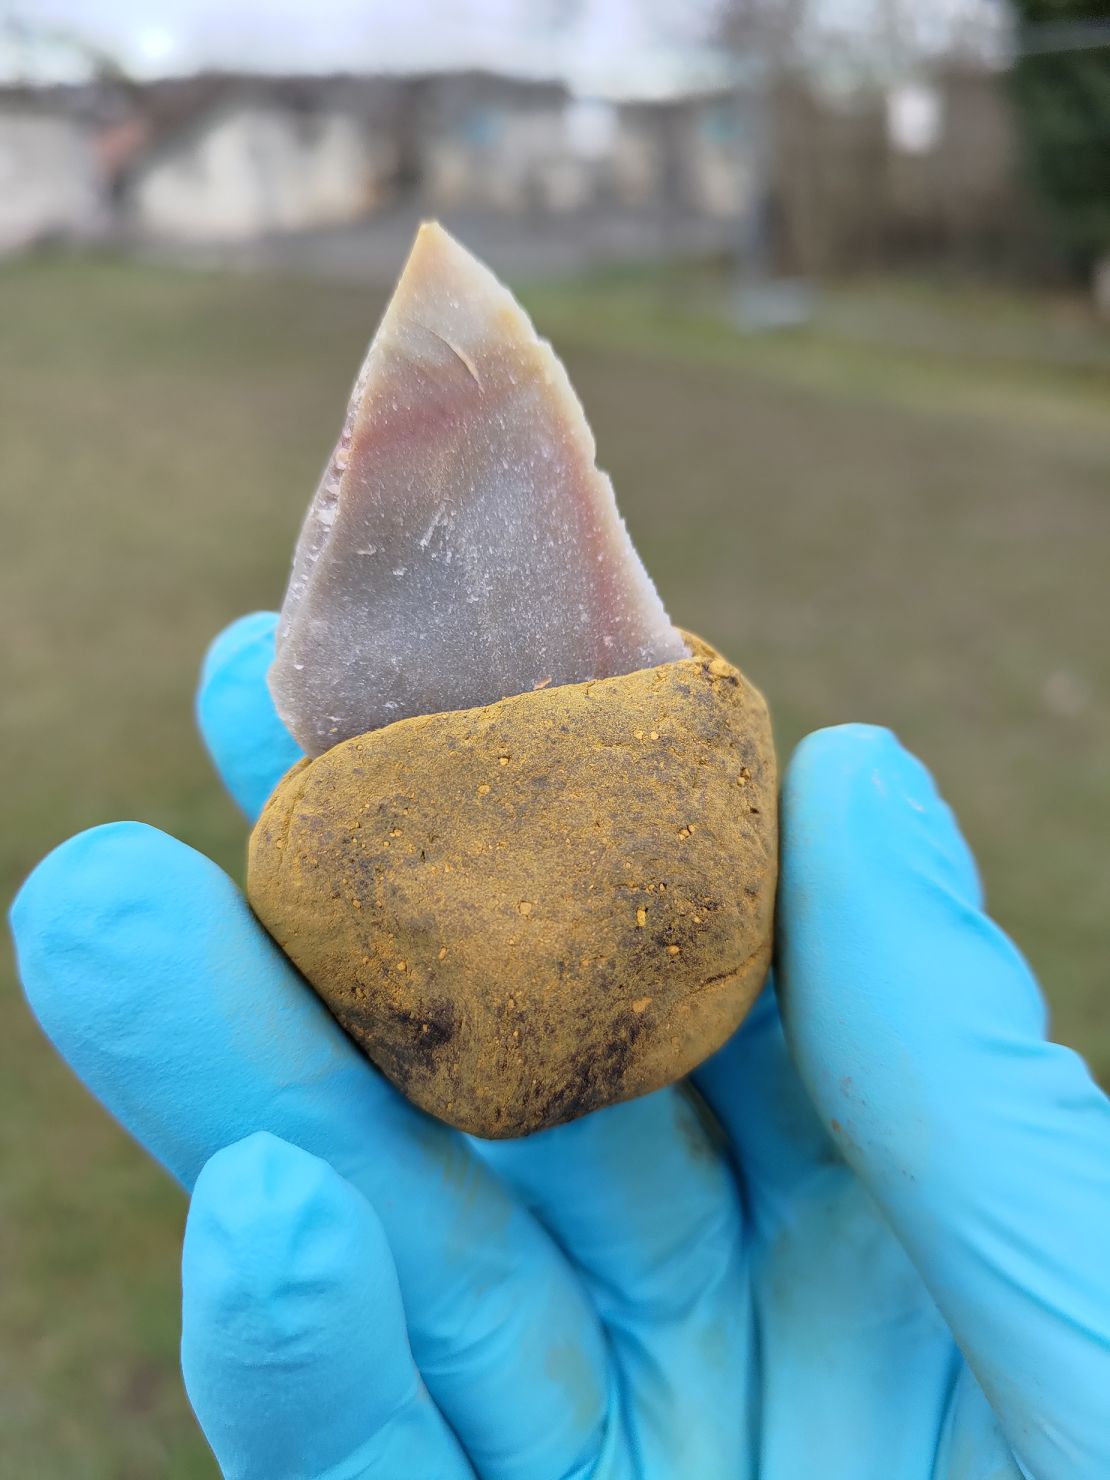 The team recreated the adhesive grip and attached it to a stone tool.